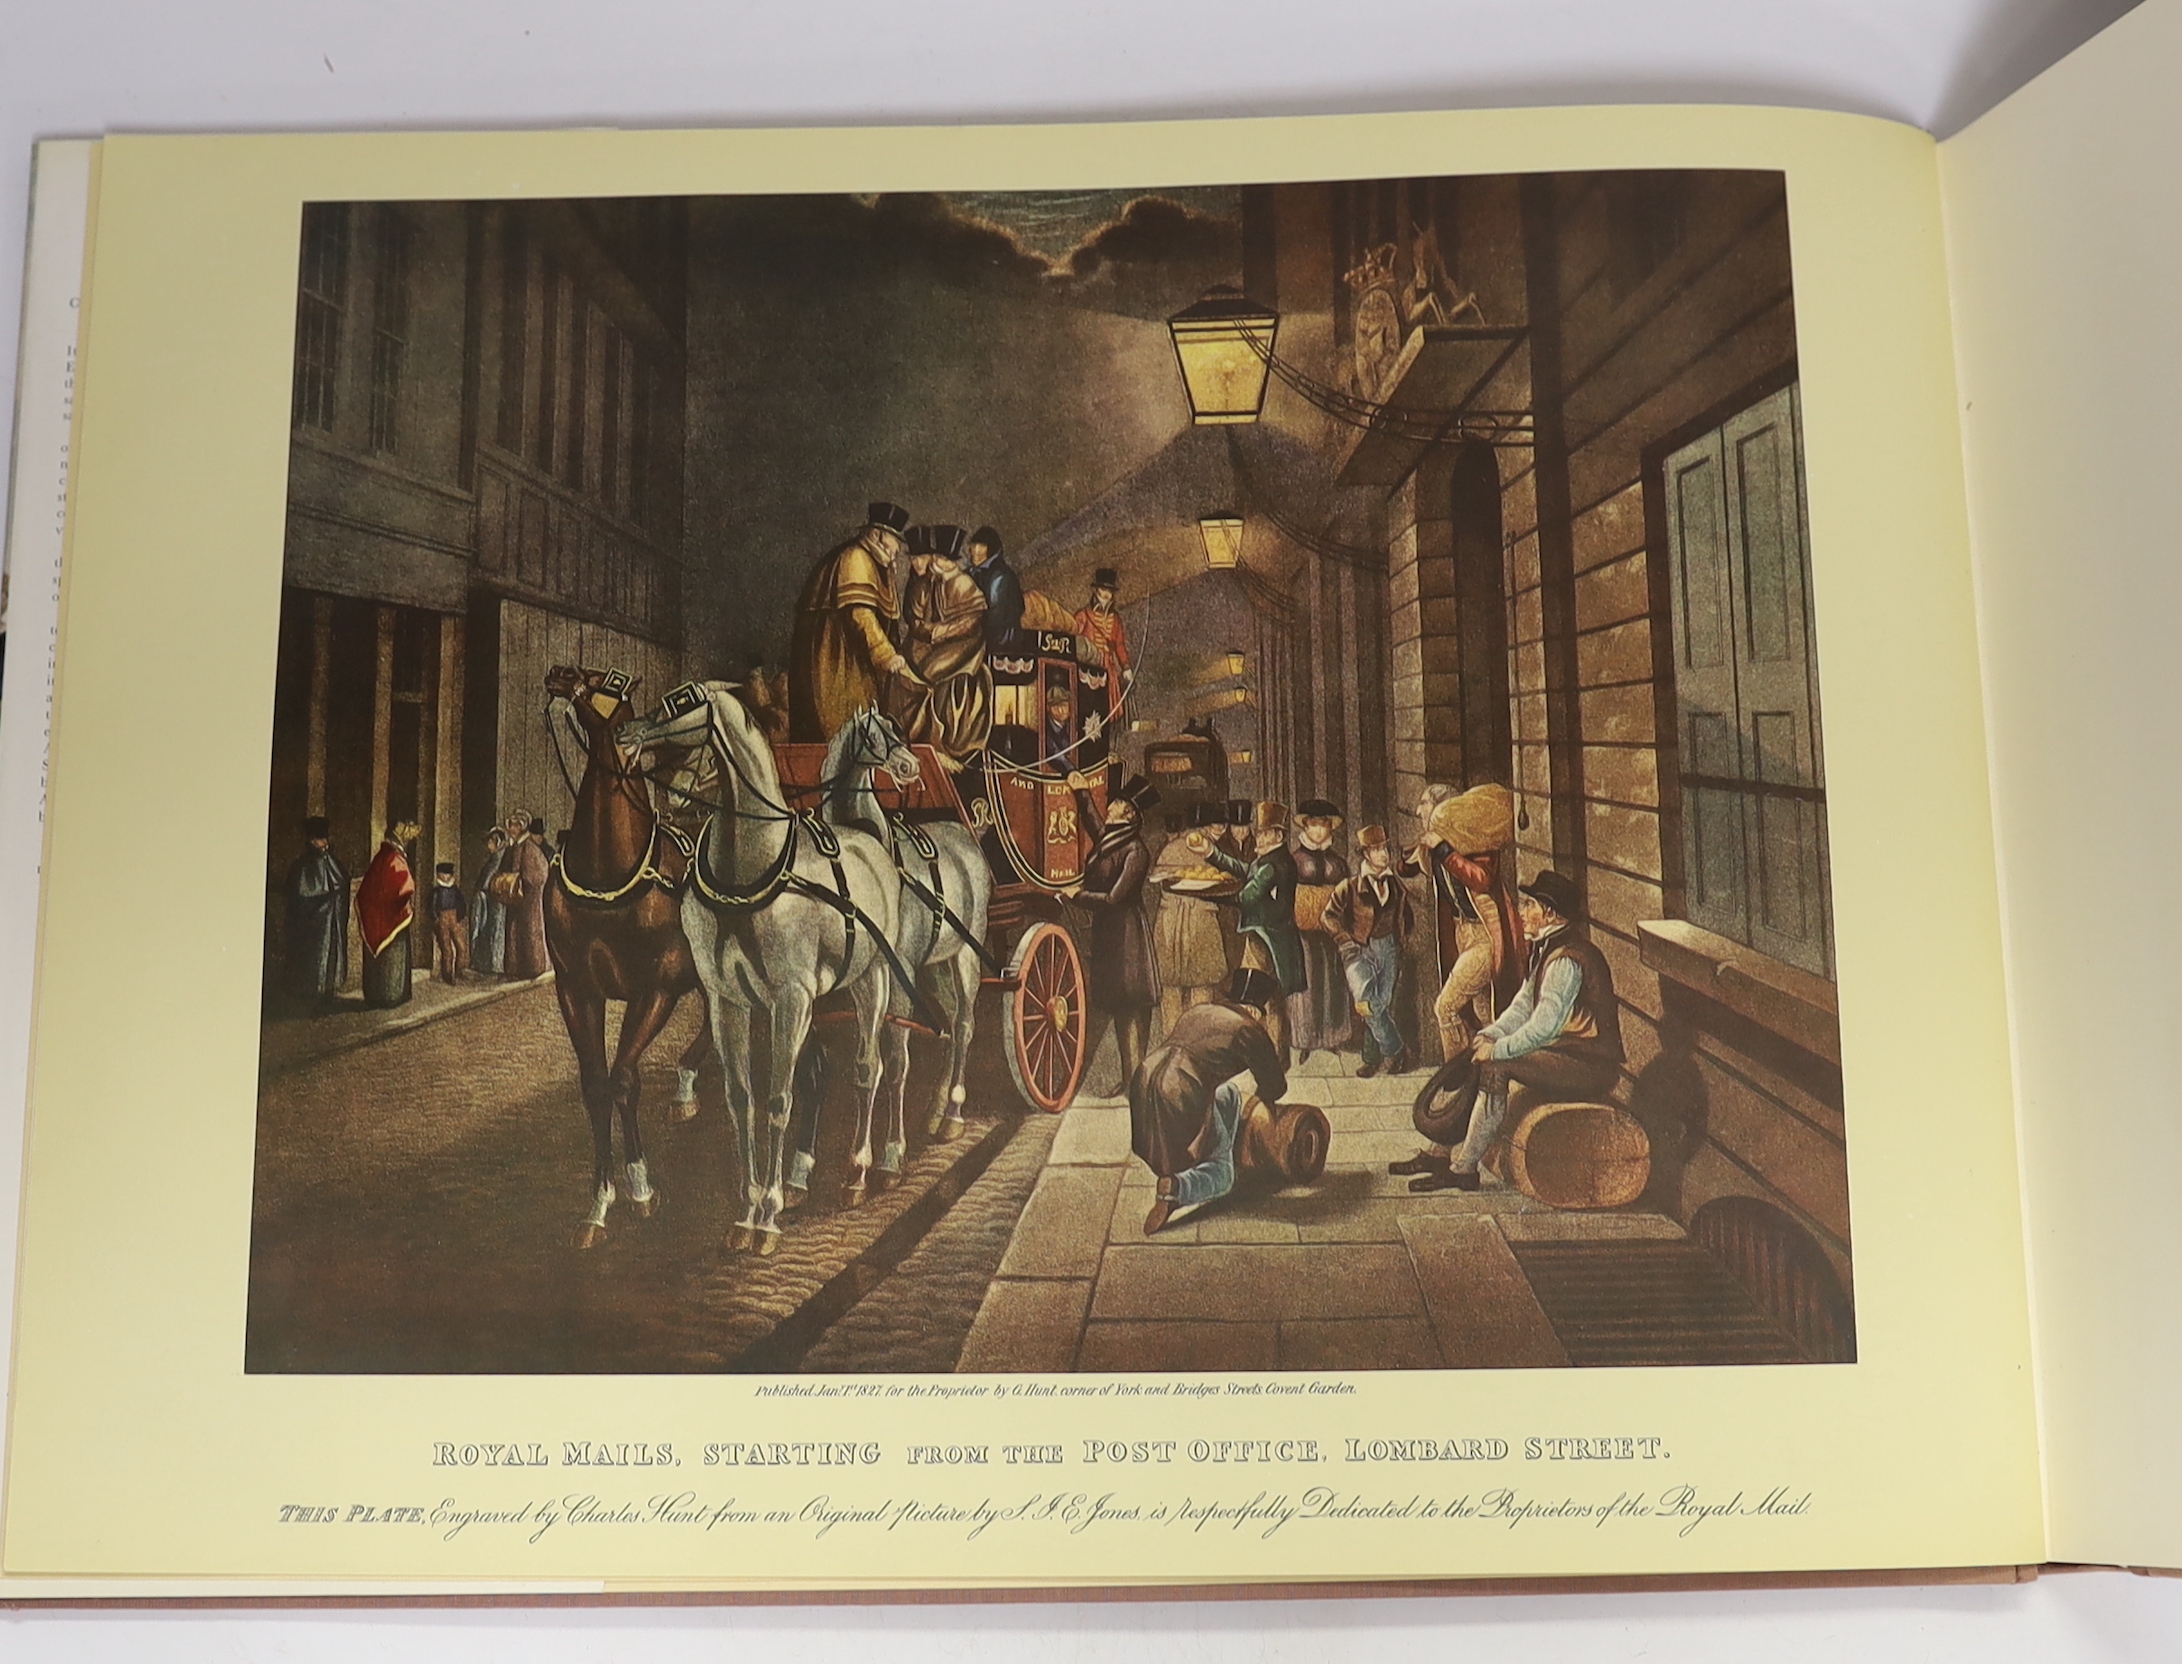 Burgess, Anthony - Coaching Days of Old England: containing an account of whatever was most remarkable ... comprehensively the years 1750 until 1850. 23 coloured plates and numerous other illus.; publishers cloth and d/w